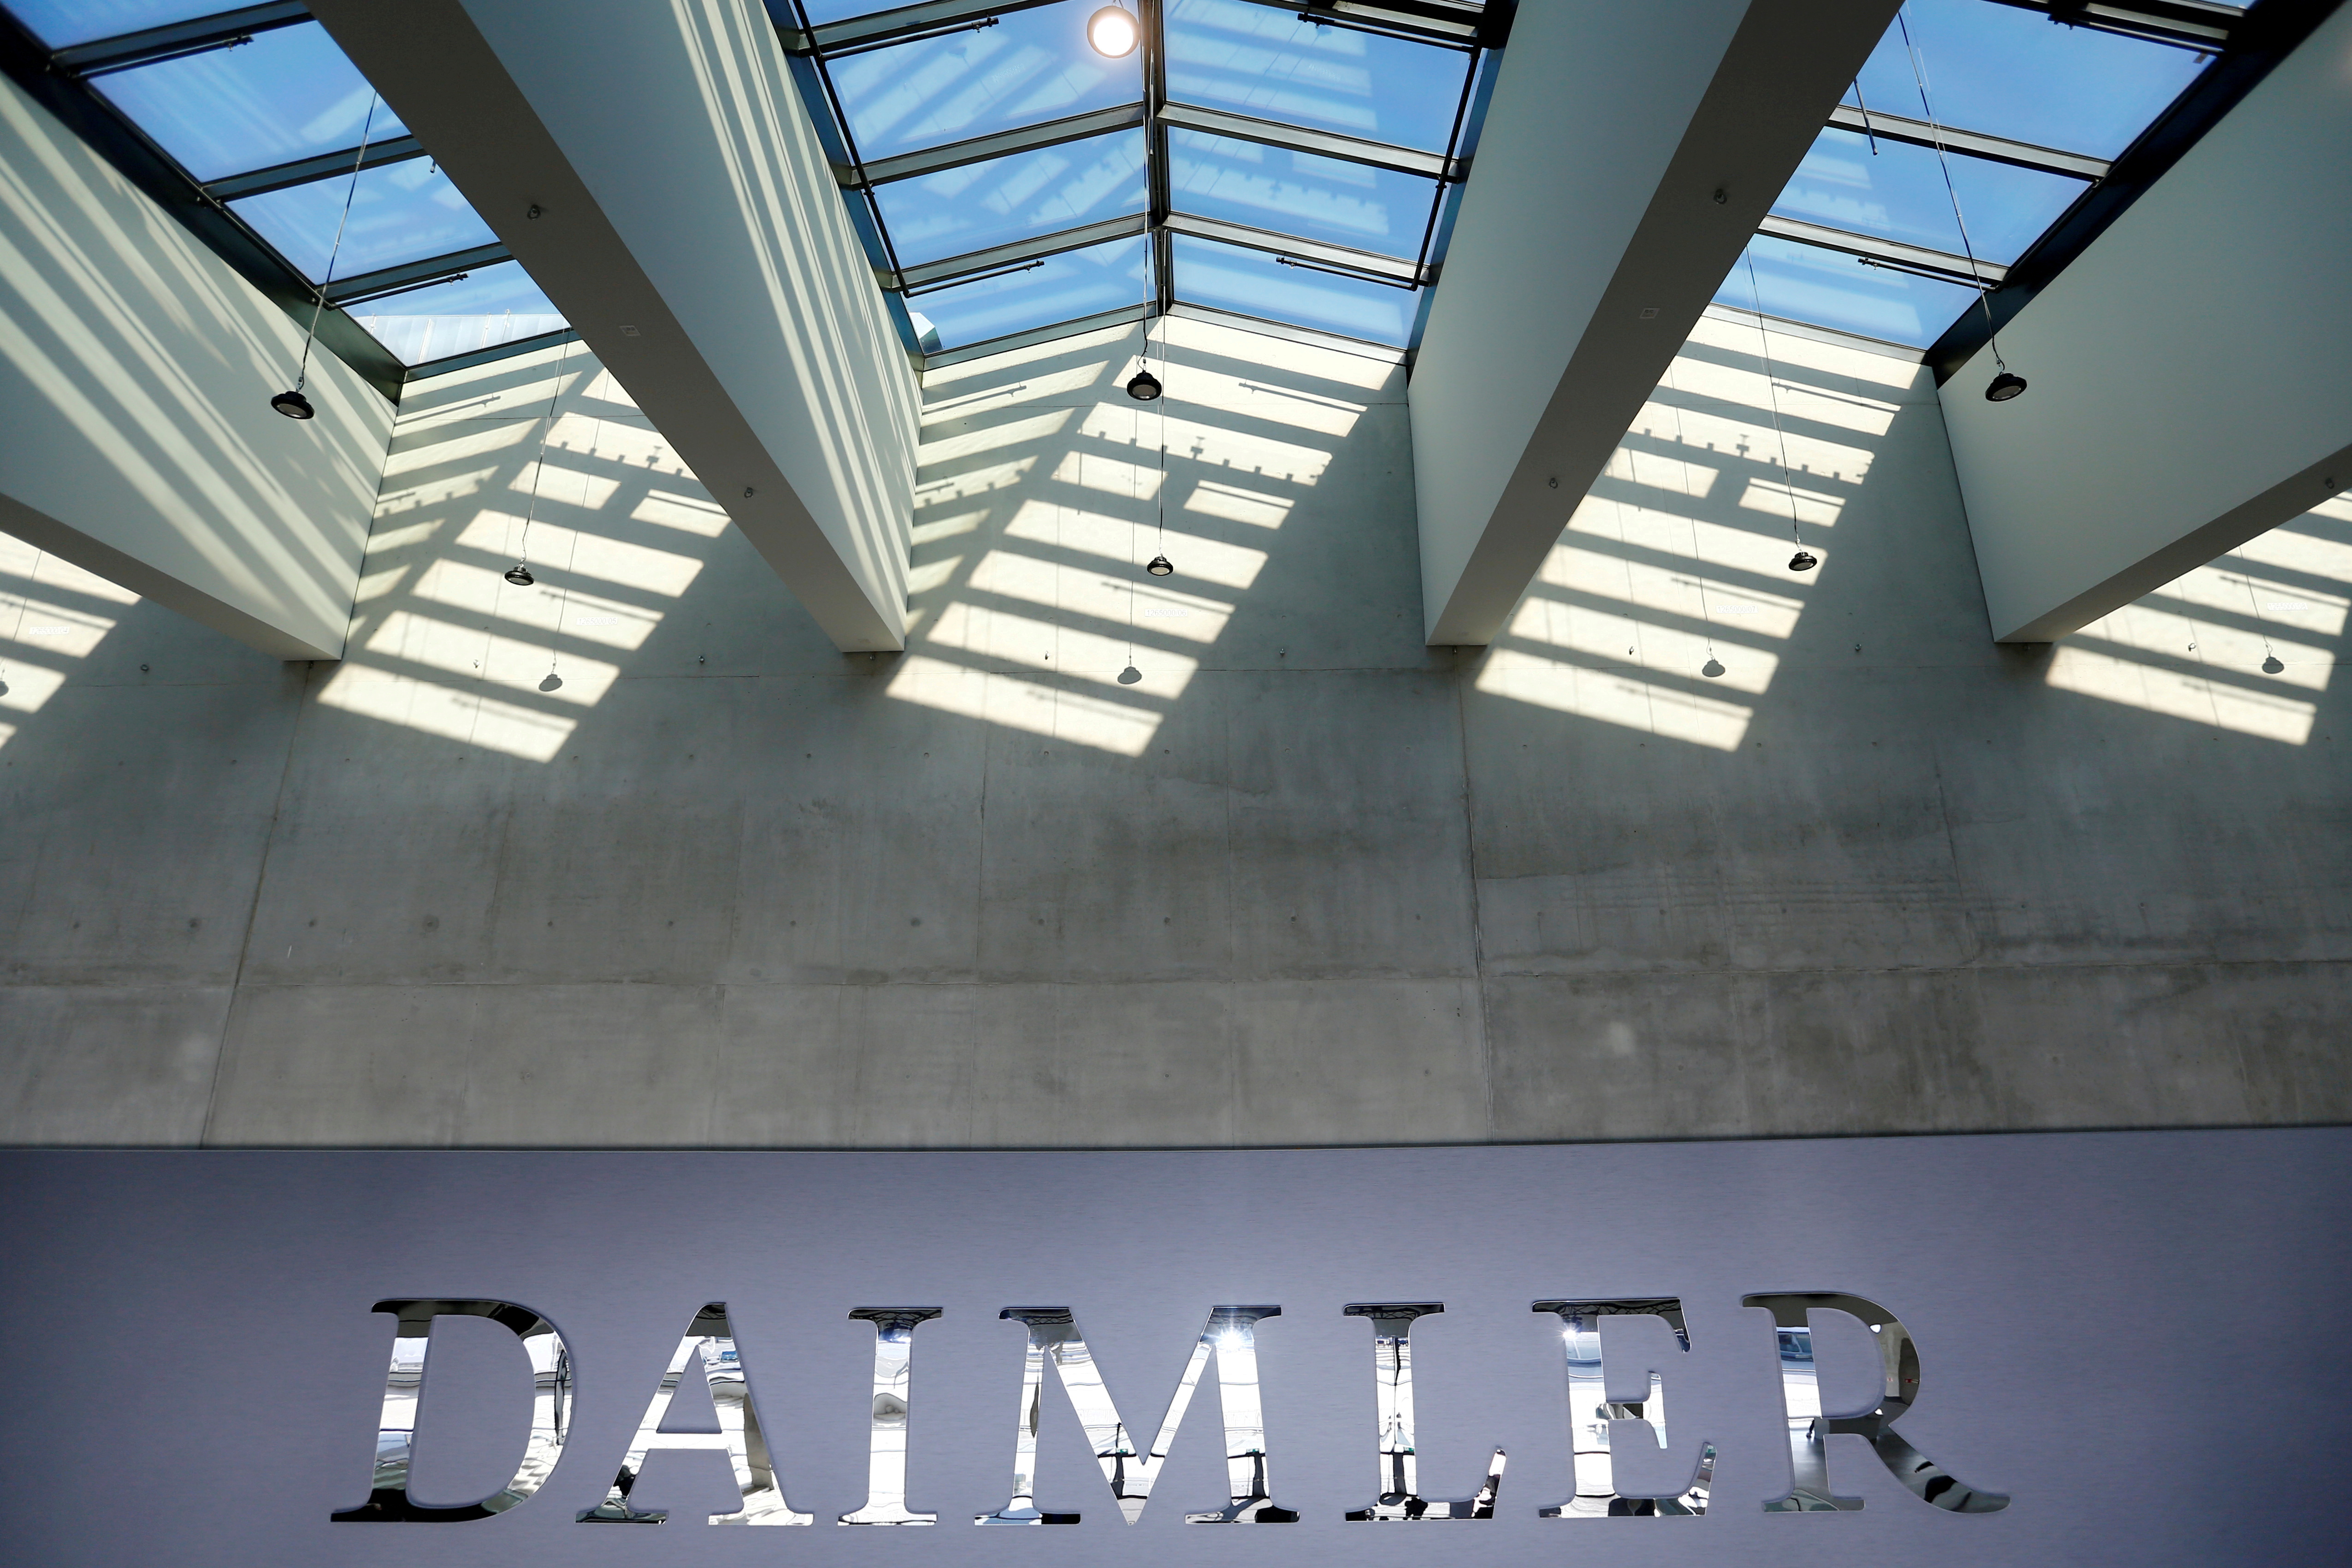 The Daimler logo is seen before the carmaker's annual shareholder meeting in Berlin